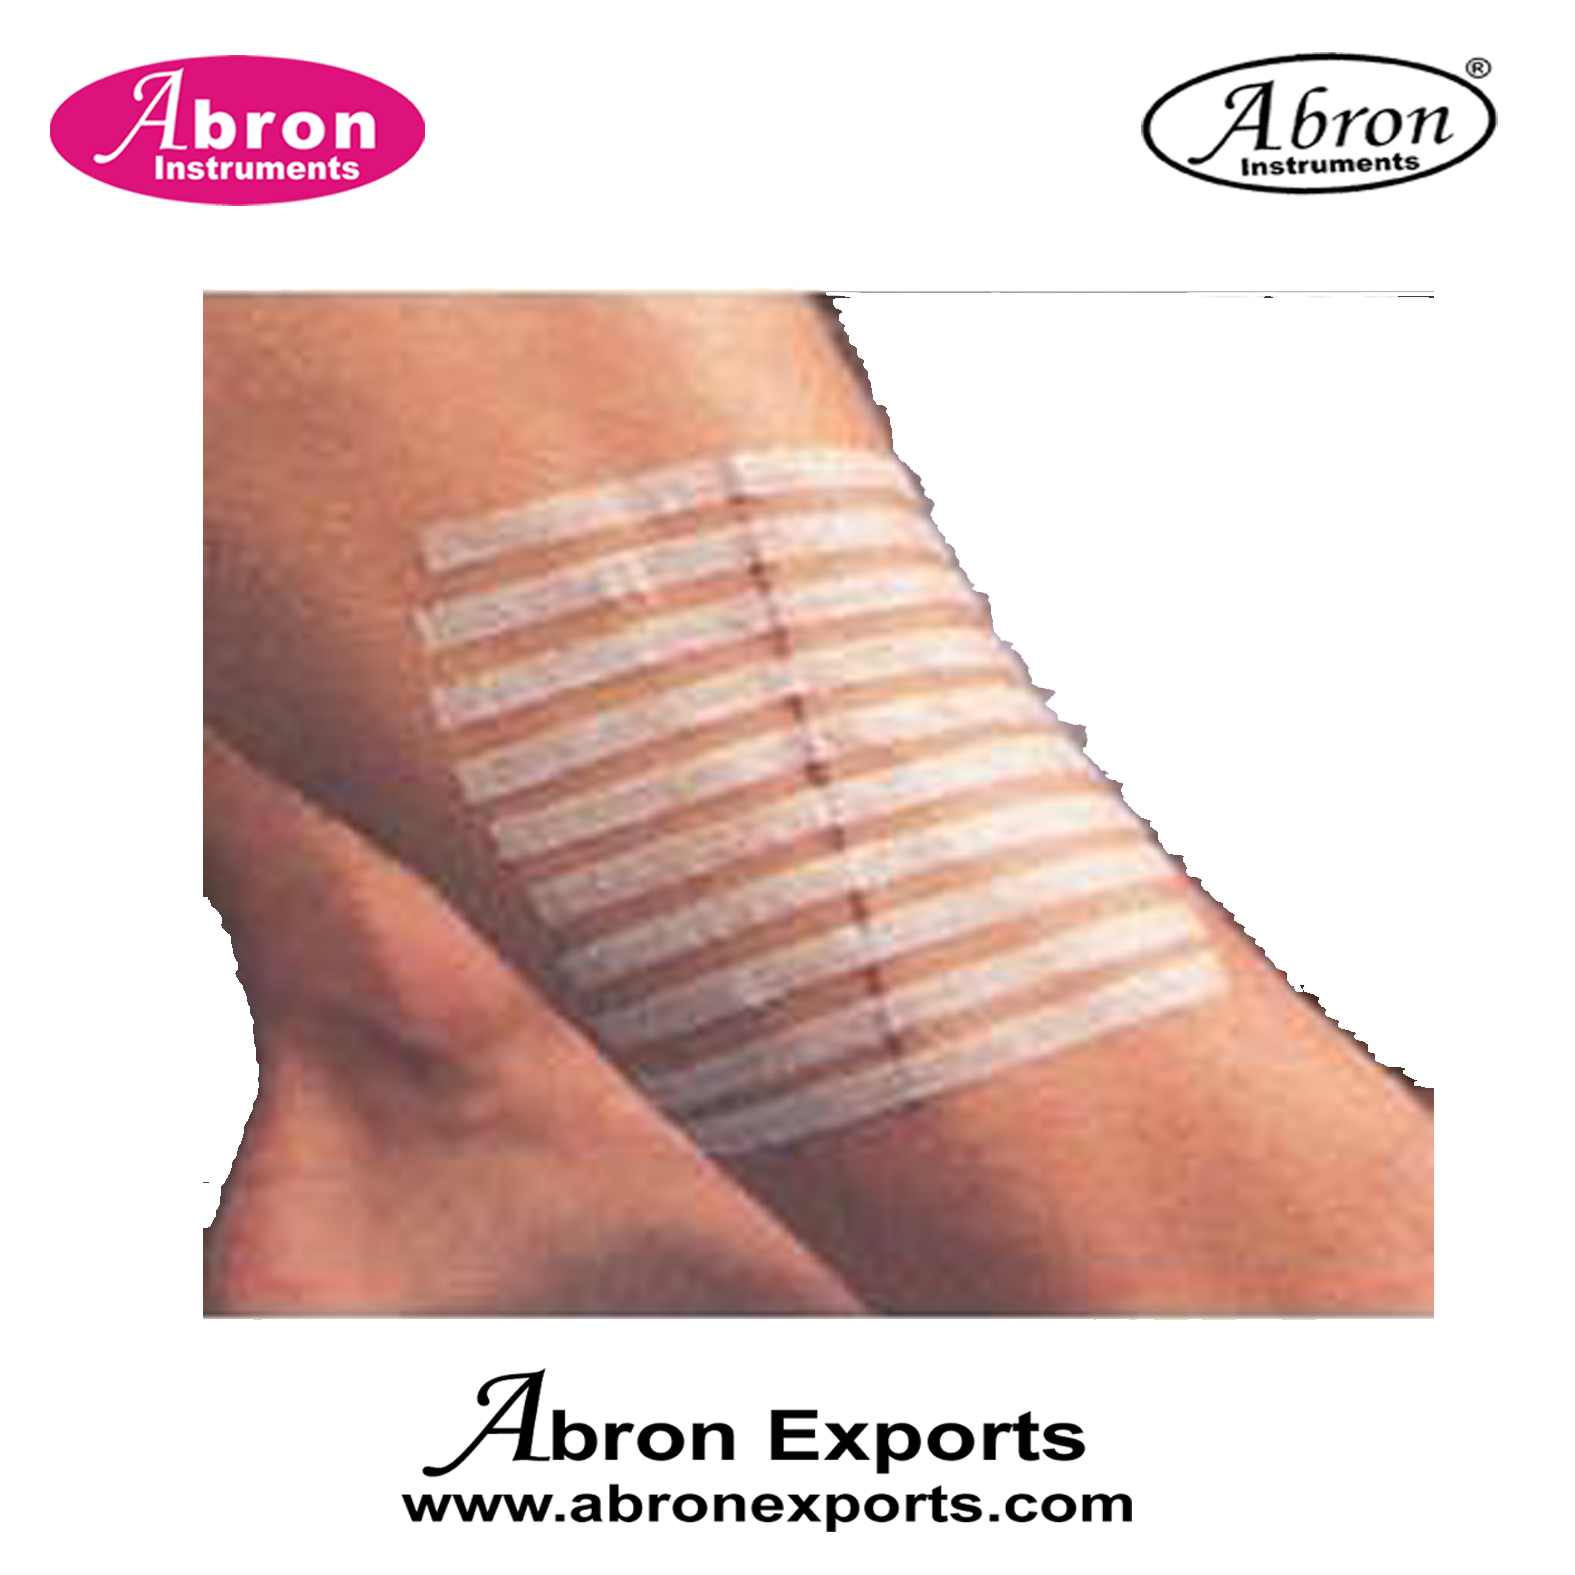 Surgical Bandage Cotton Bandage Strip for dressing surgical first air kit pack of 100 abron ABM-2524S 